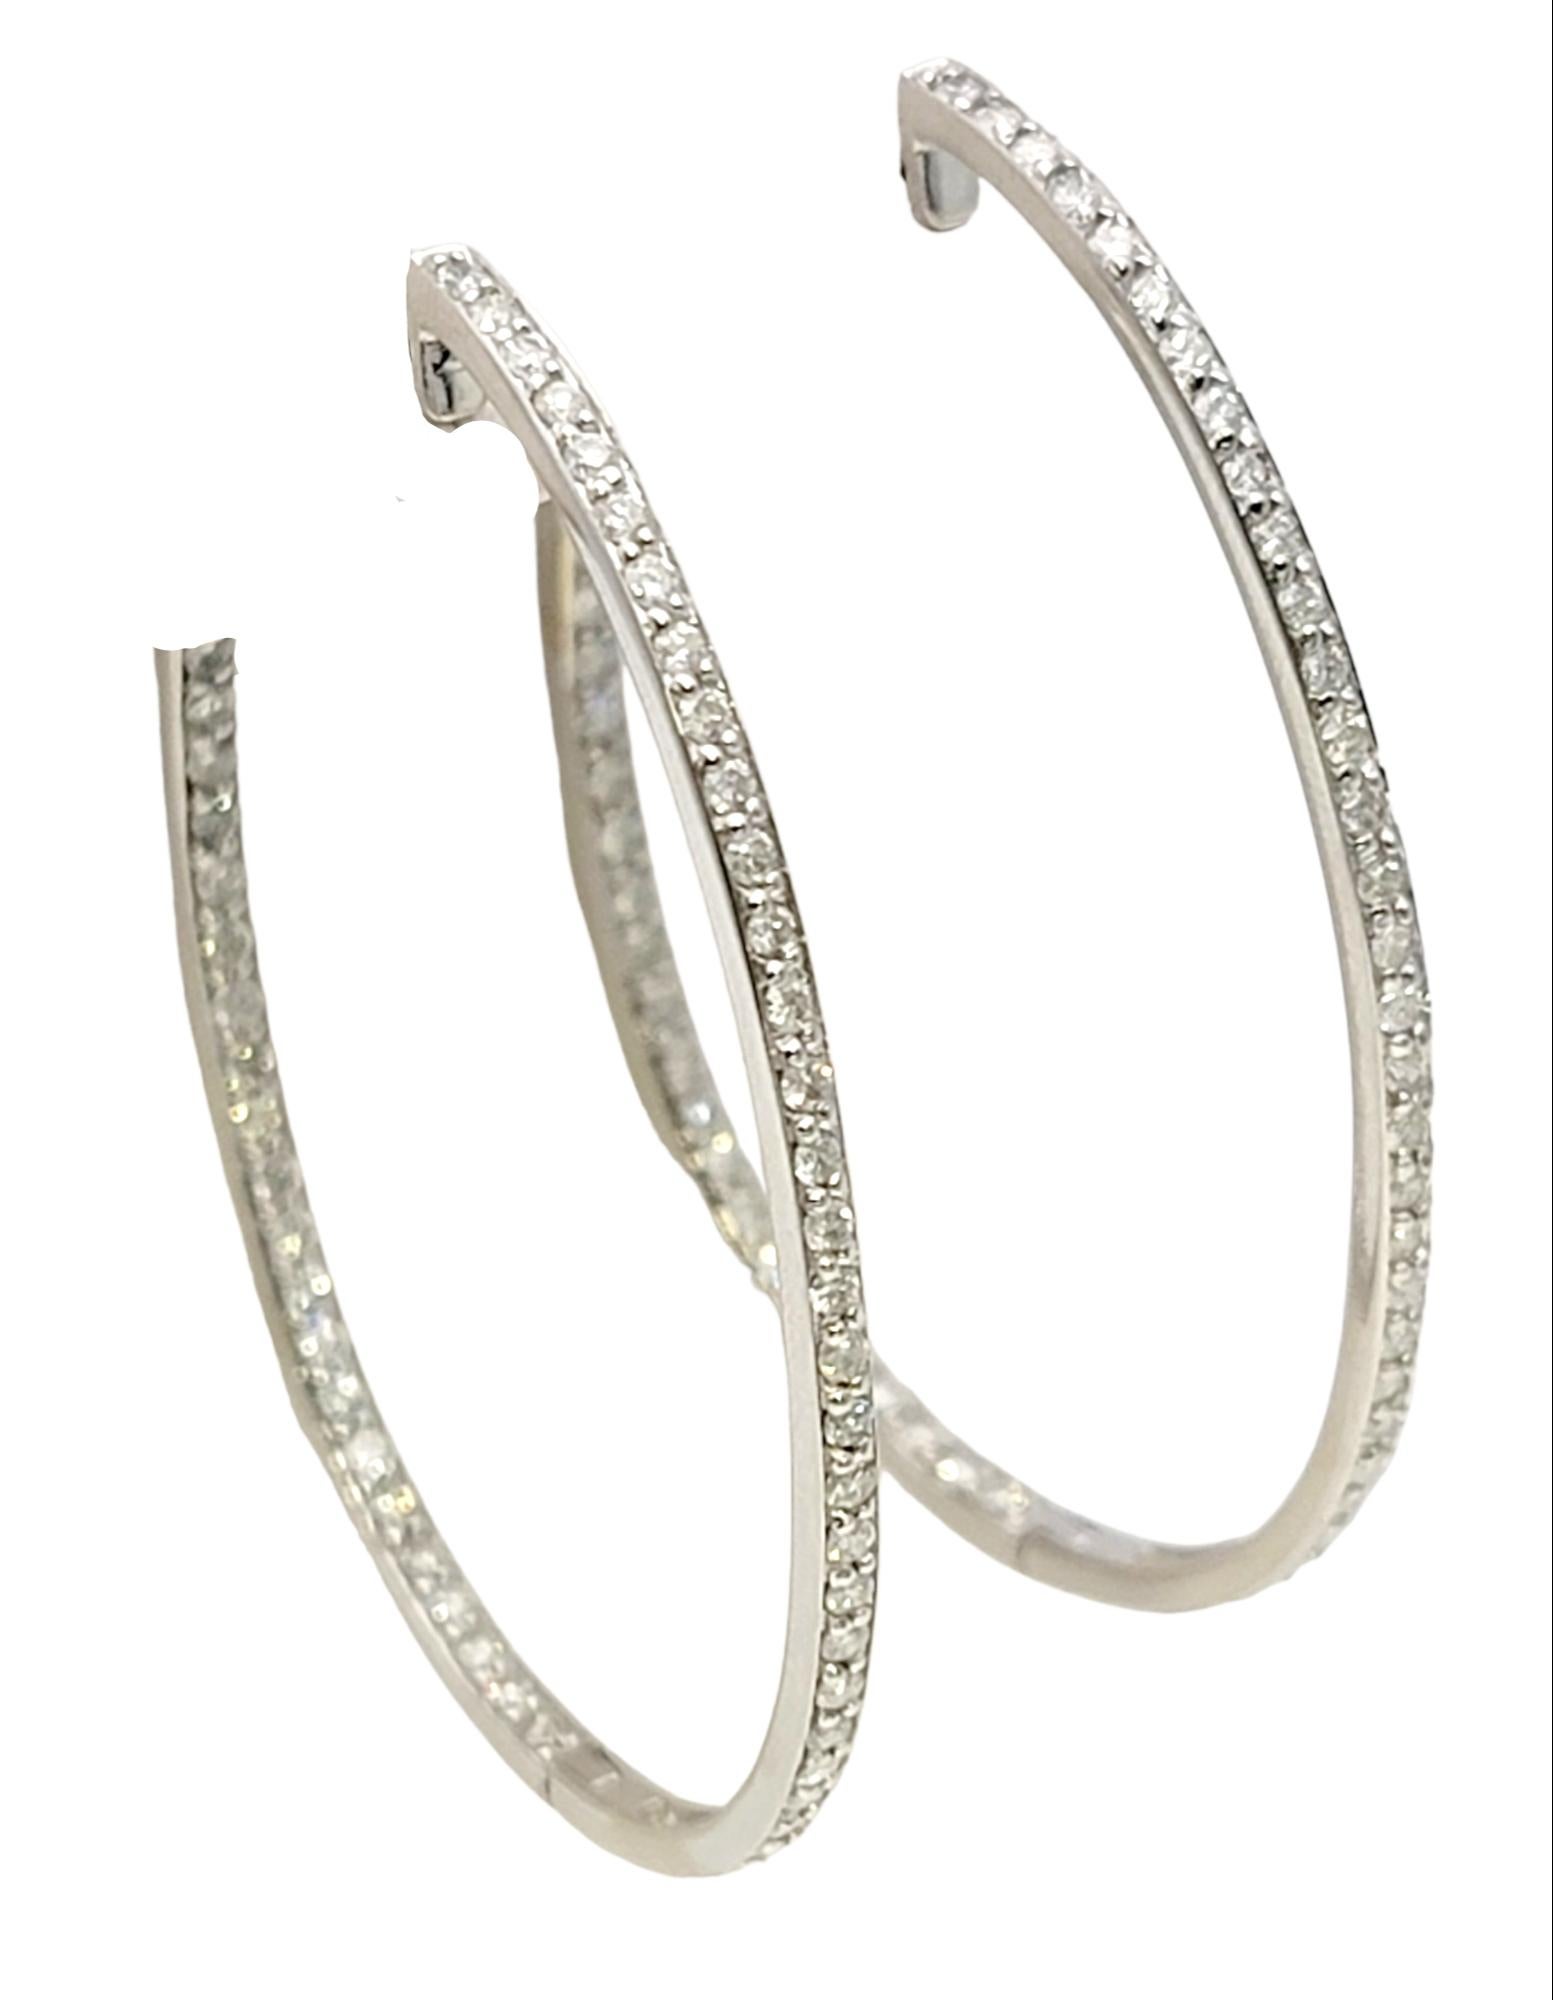 Contemporary Large Inside-Outside Pave Diamond Oval Hoop Earrings in 14 Karat White Gold For Sale